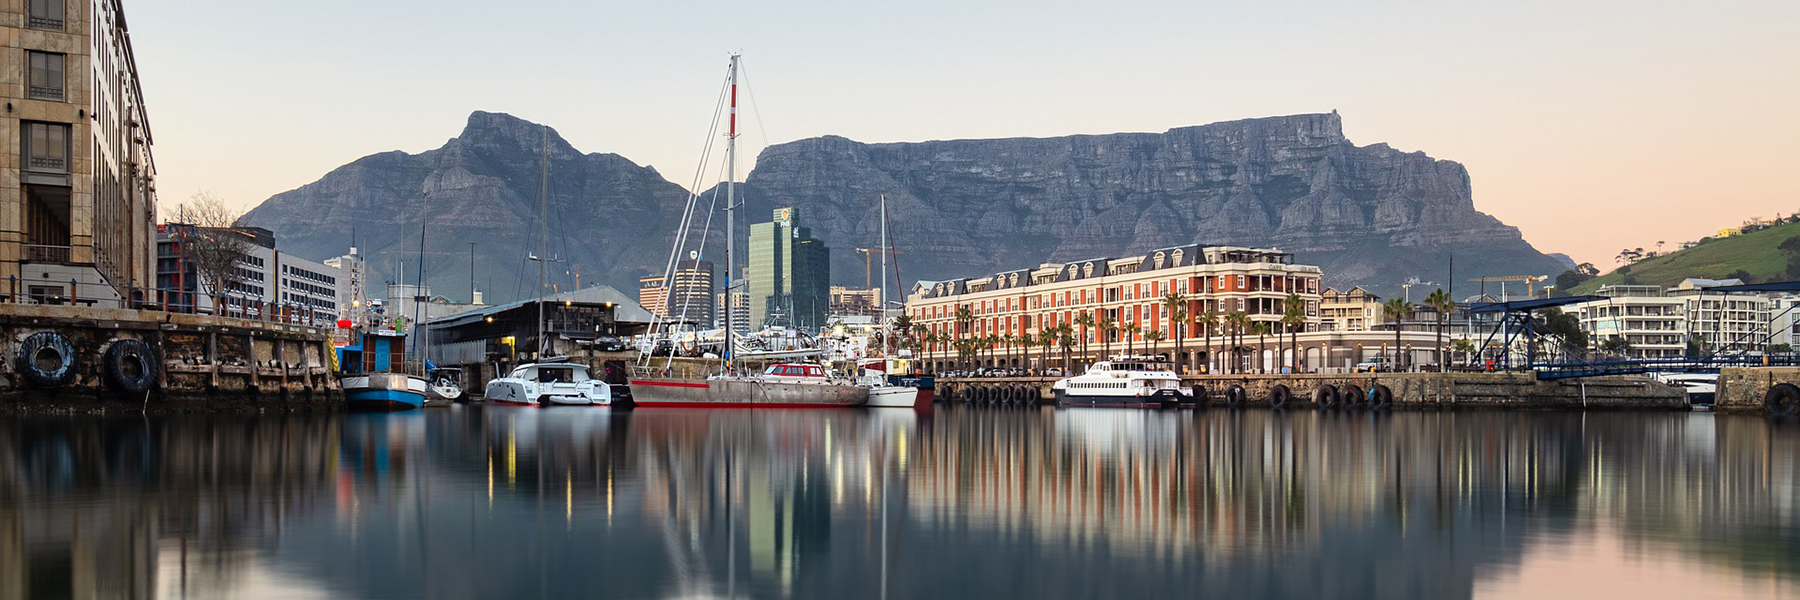 Image of Cape Town, South Africa from the water with Table Mountain in the background